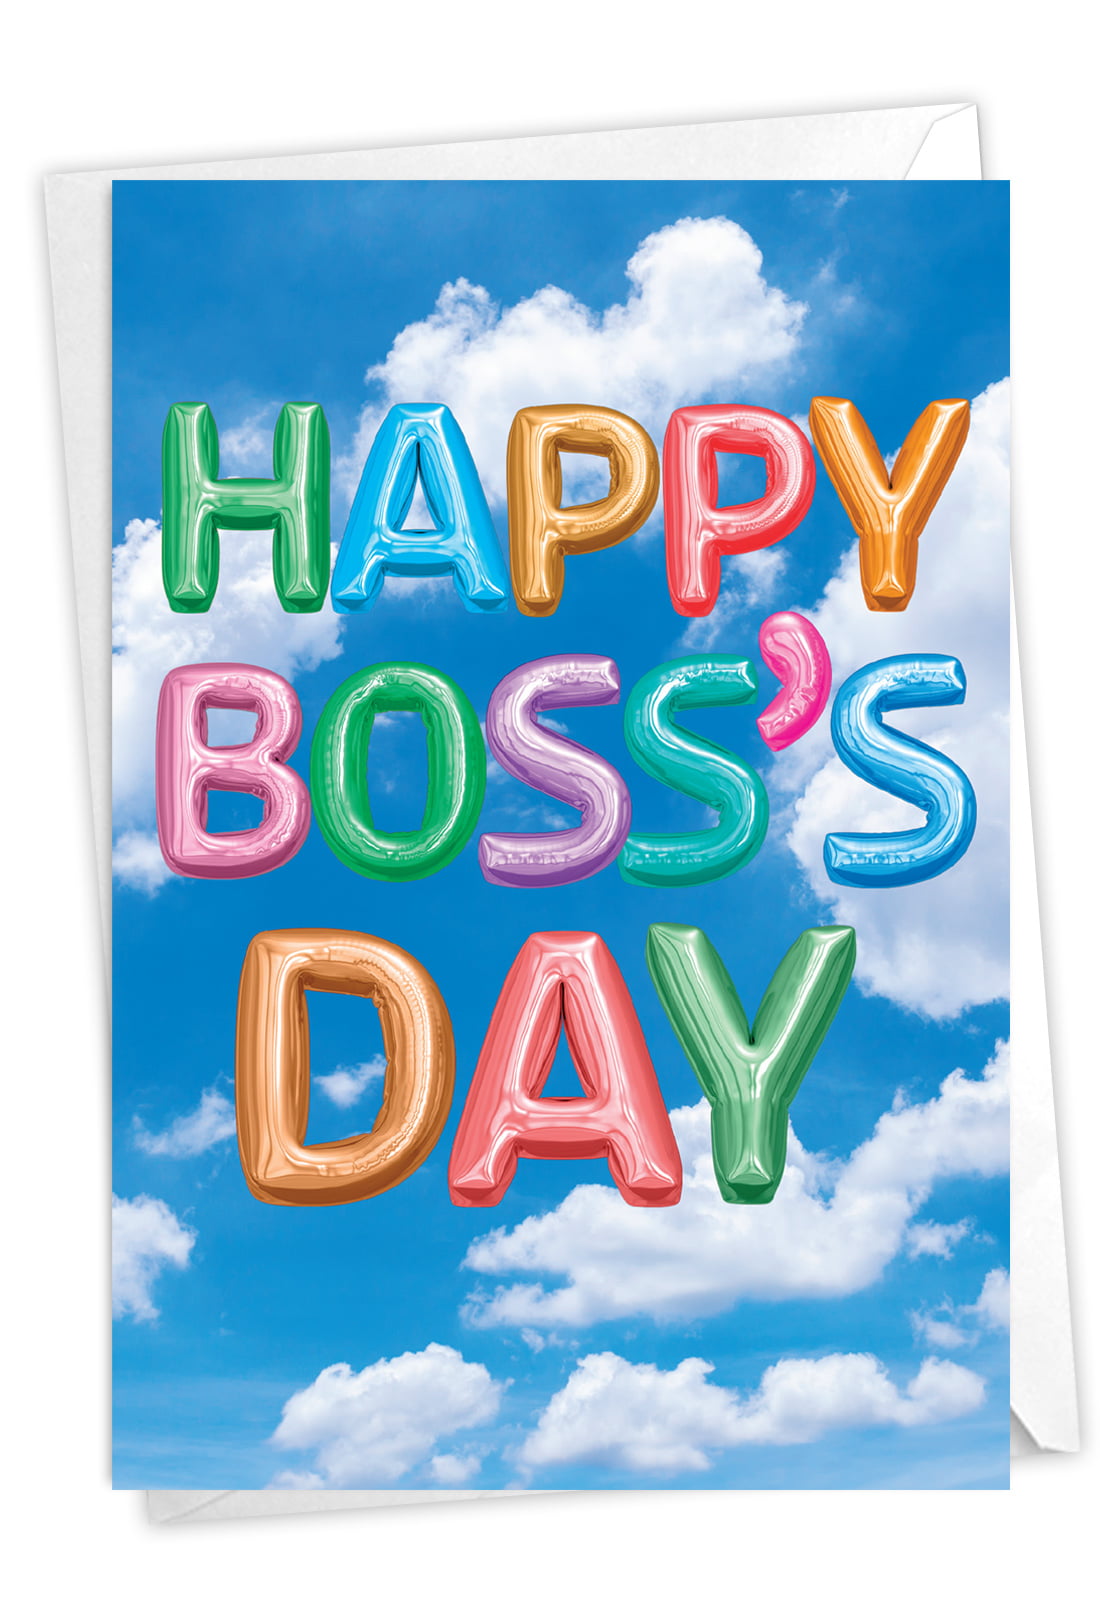 Happy Boss's Day Greeting Card Notecard for Boss, Manager, Mentor